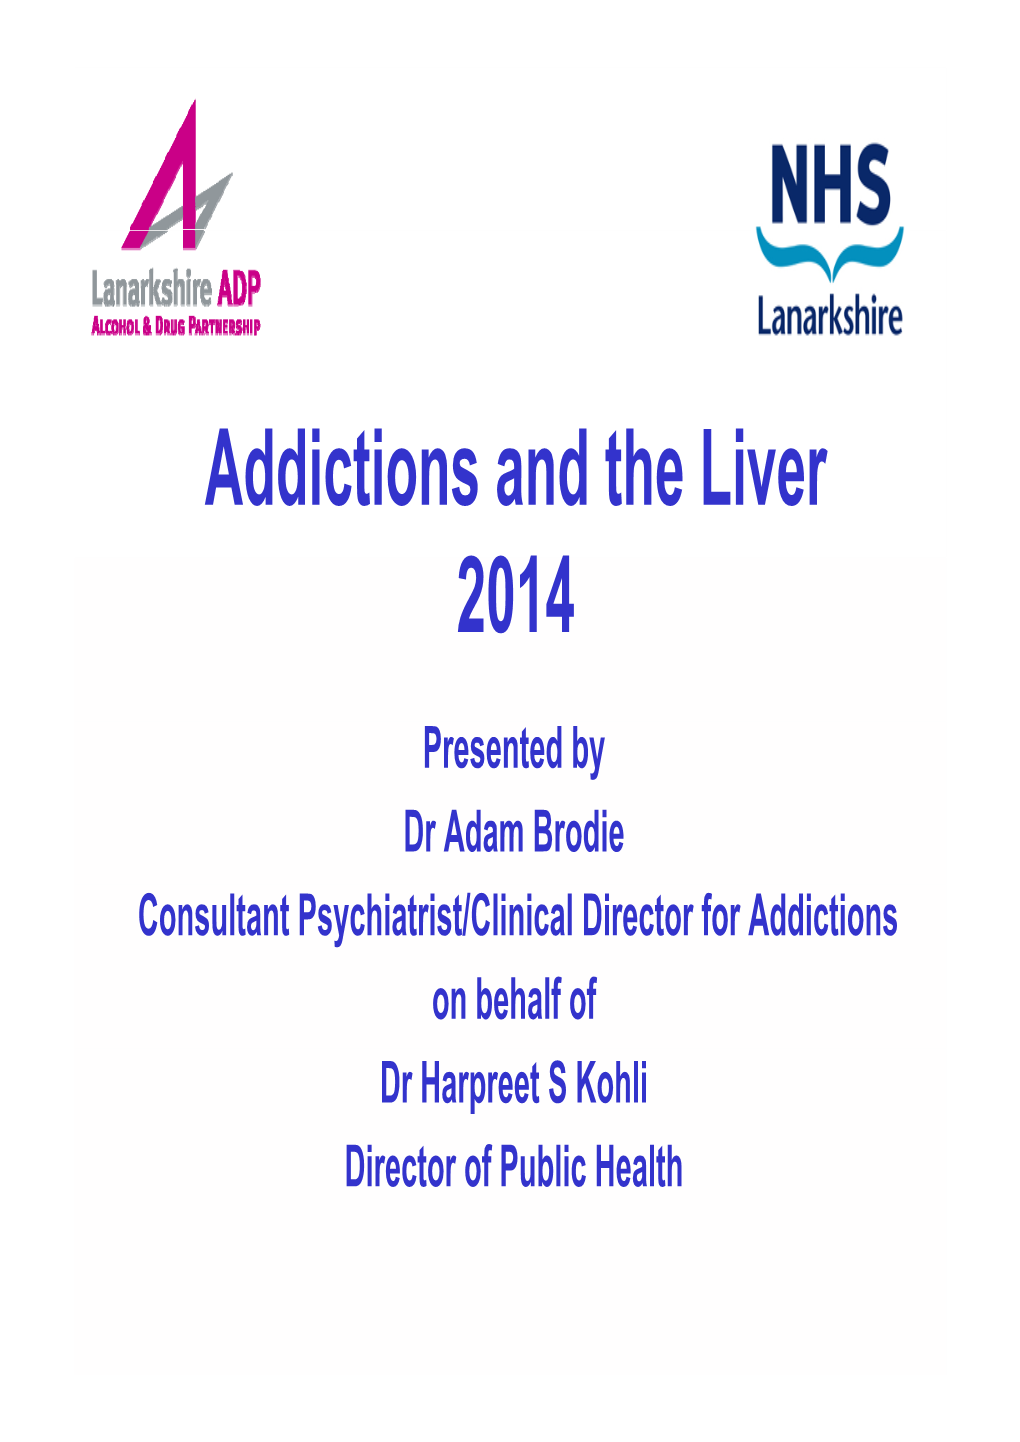 Addictions and the Liver 2014